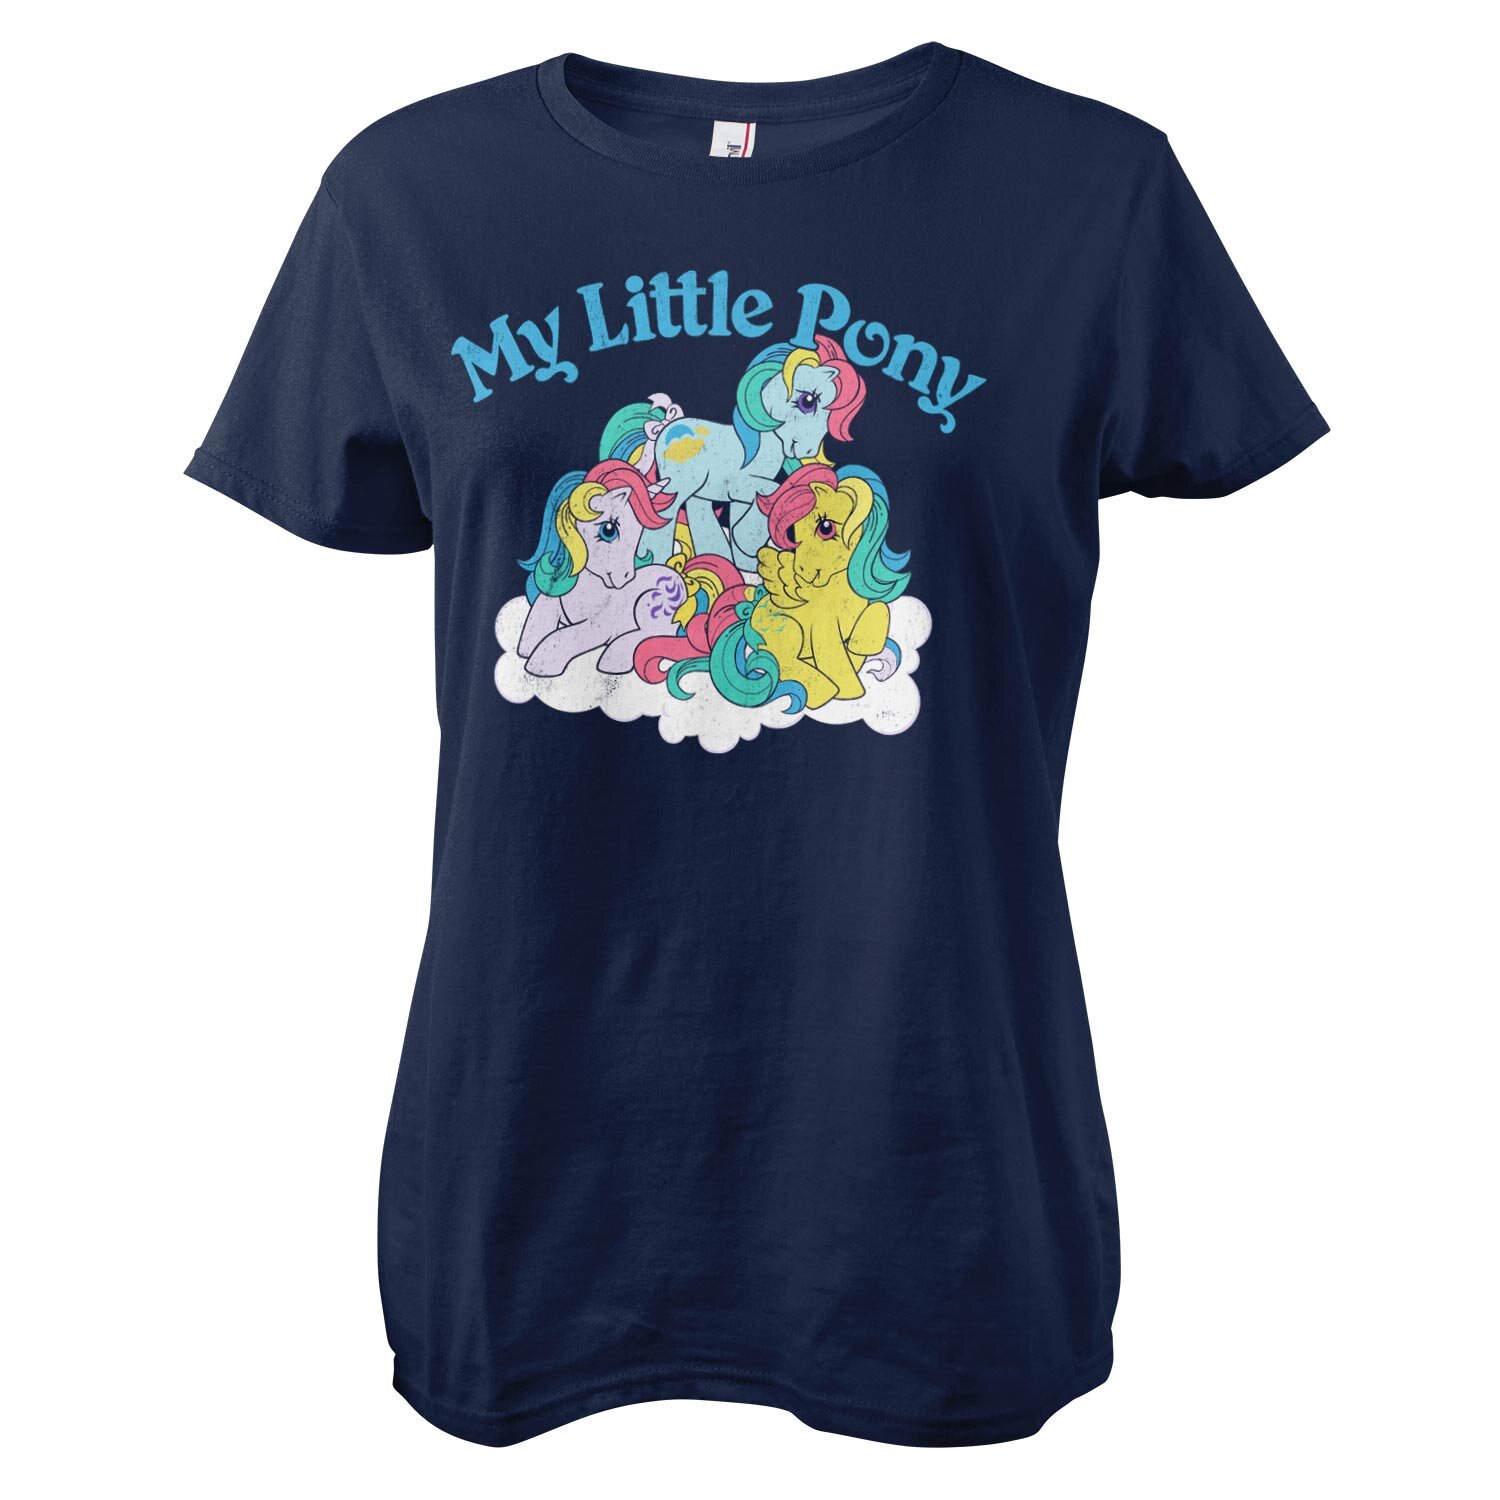 My Little Pony Washed Girly Tee